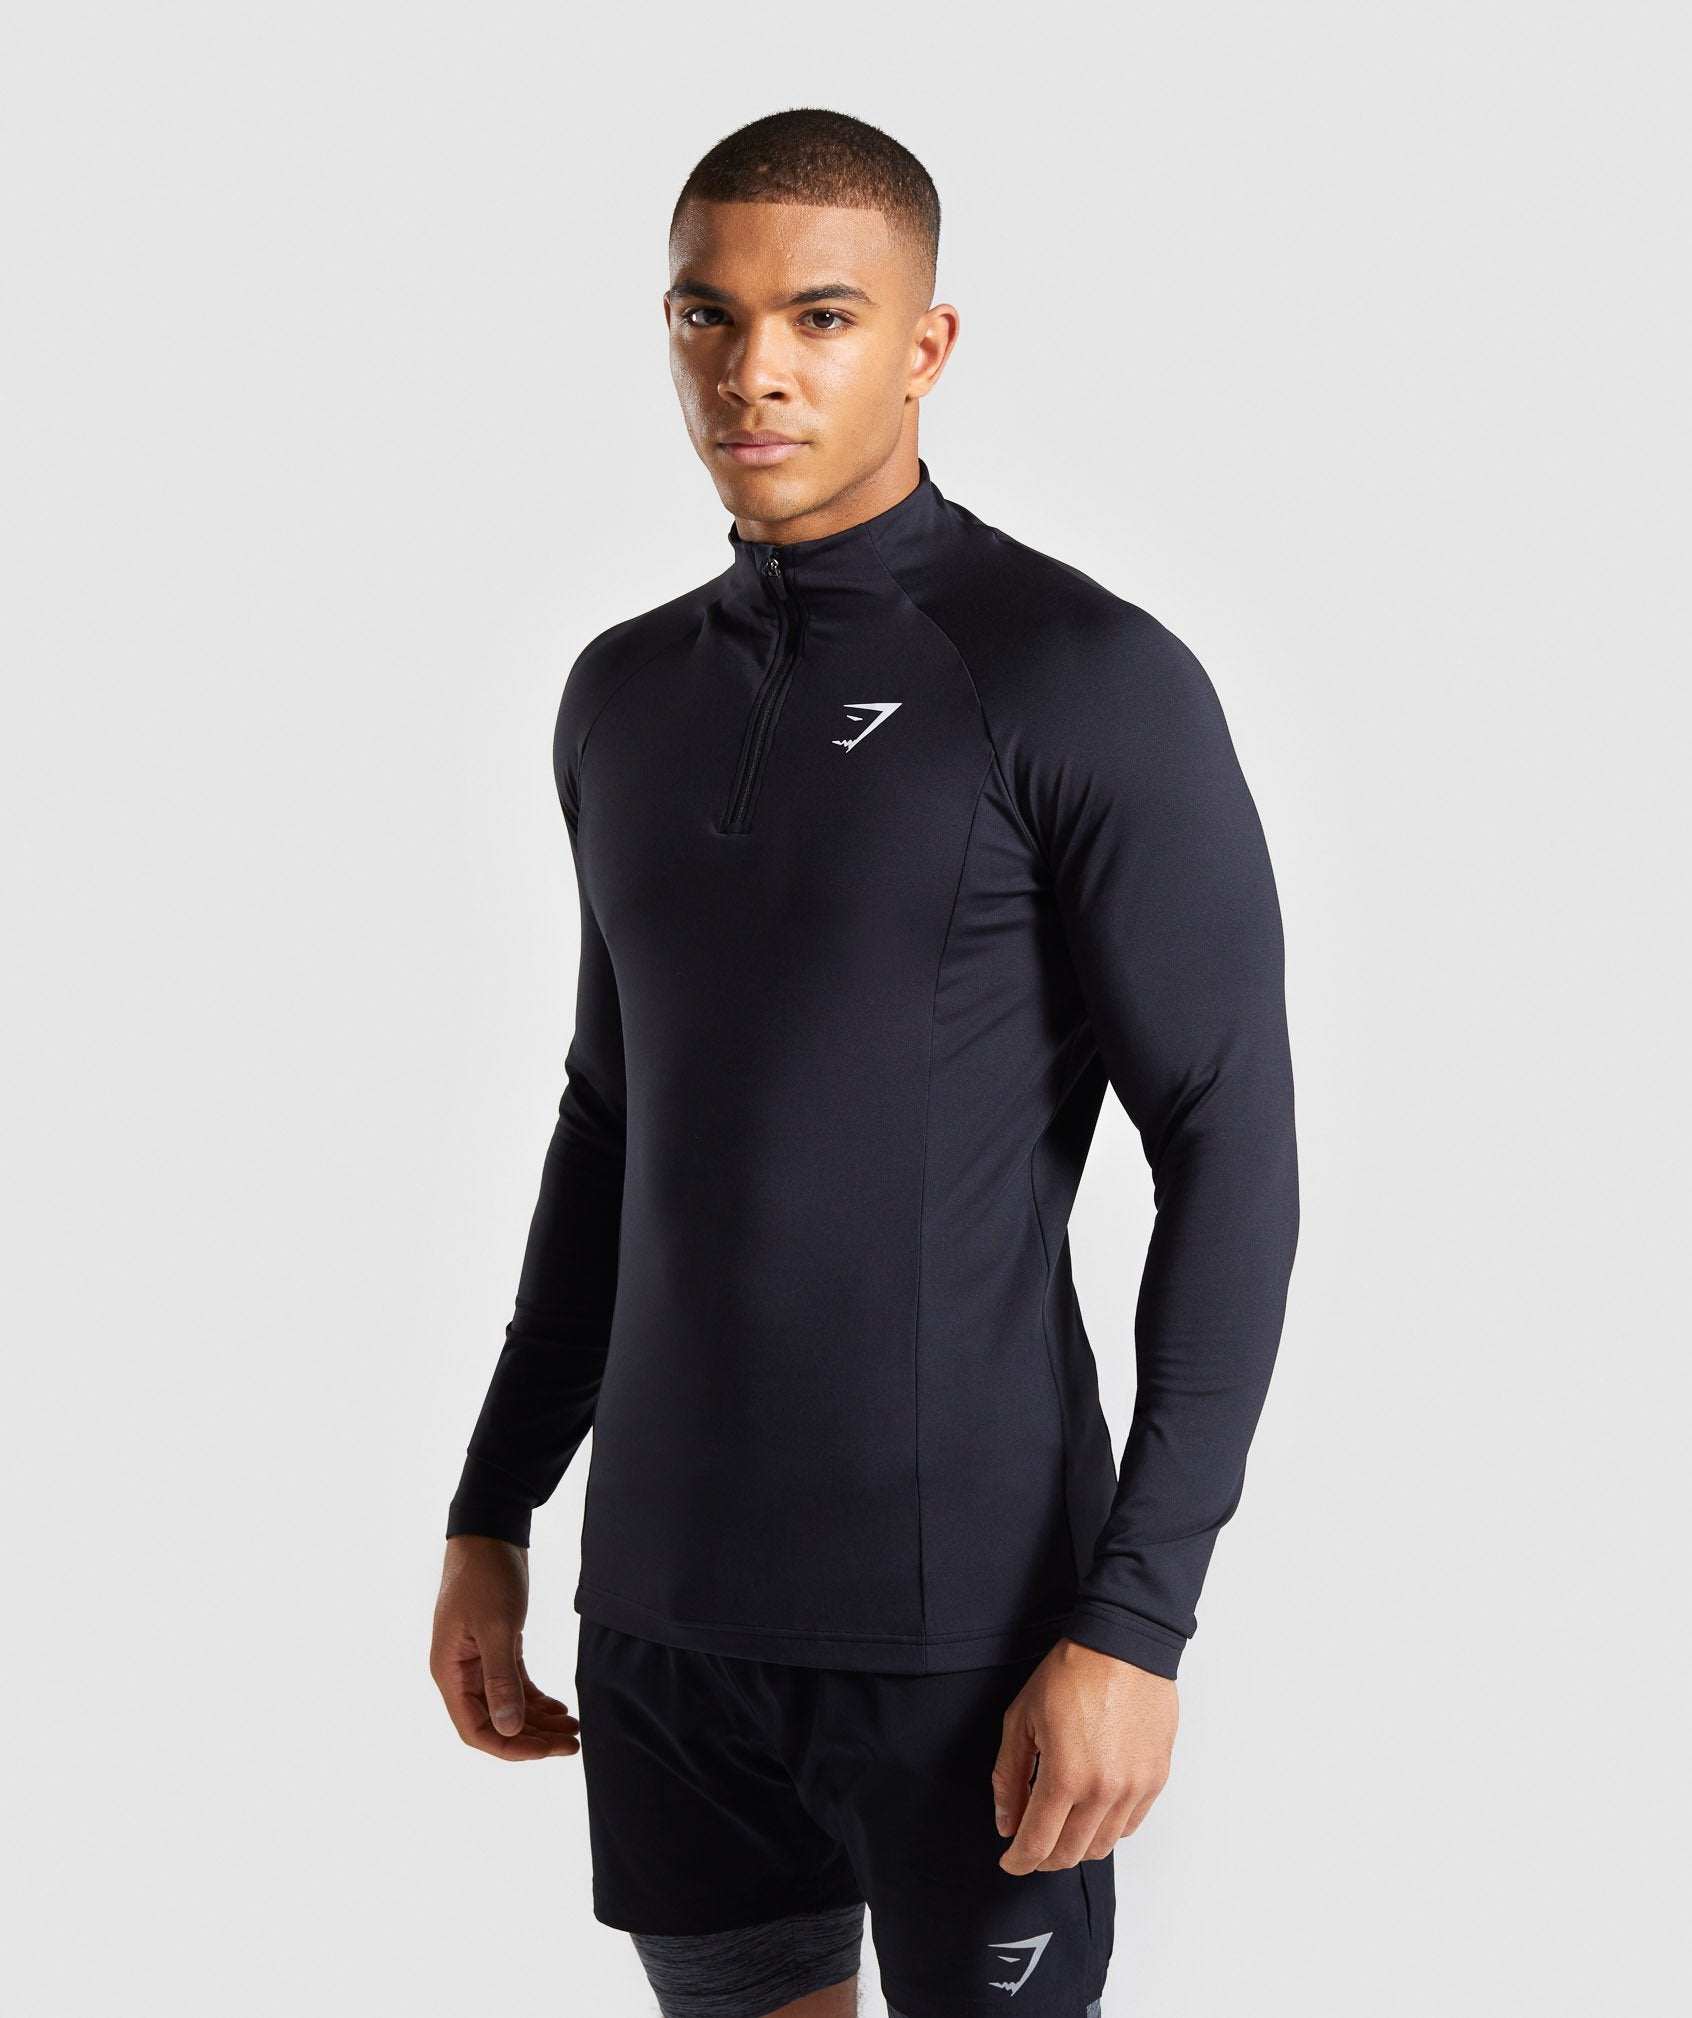 Advanced 1/4 Zip Pullover in Black - view 1